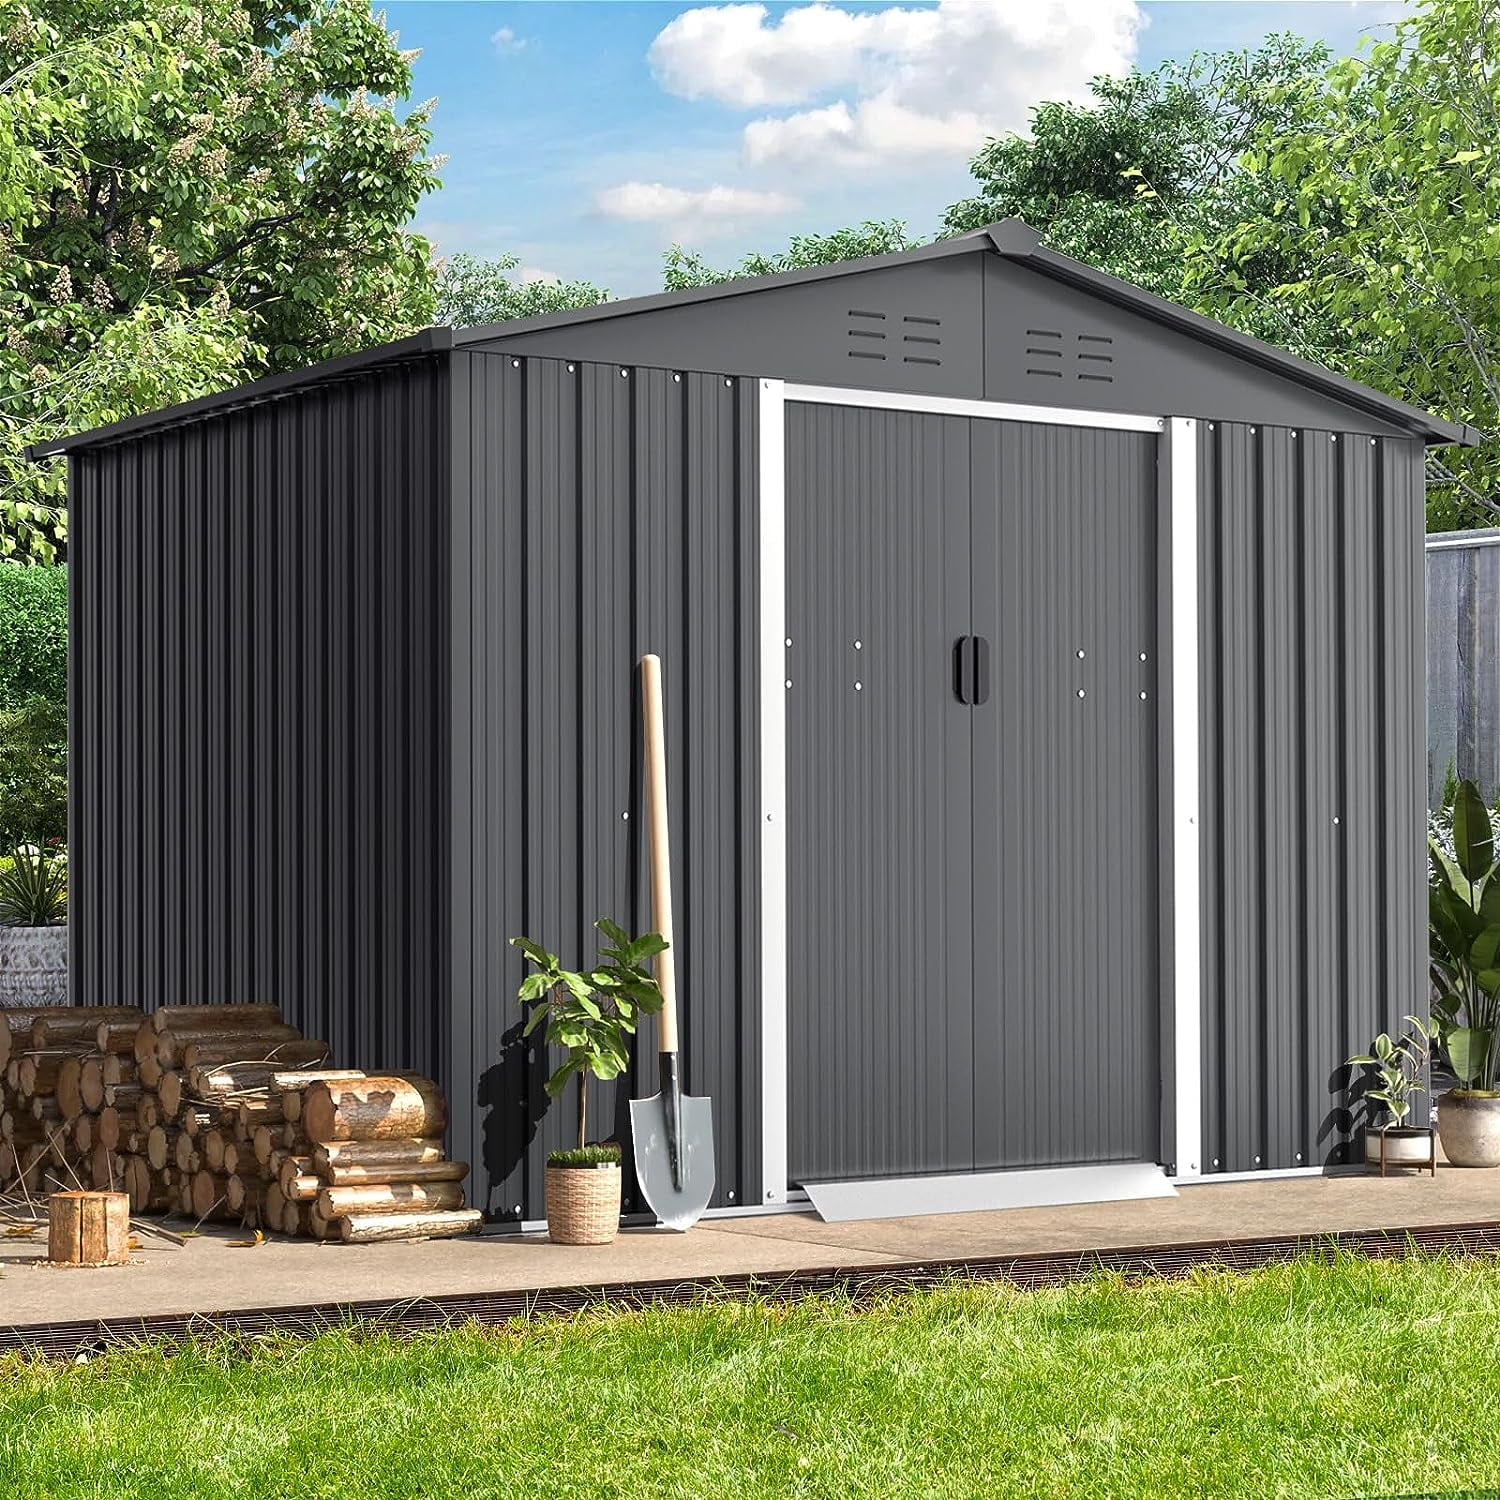 SIO Midi Brown Small Storage Shed - 4x2 Shed - Keter US